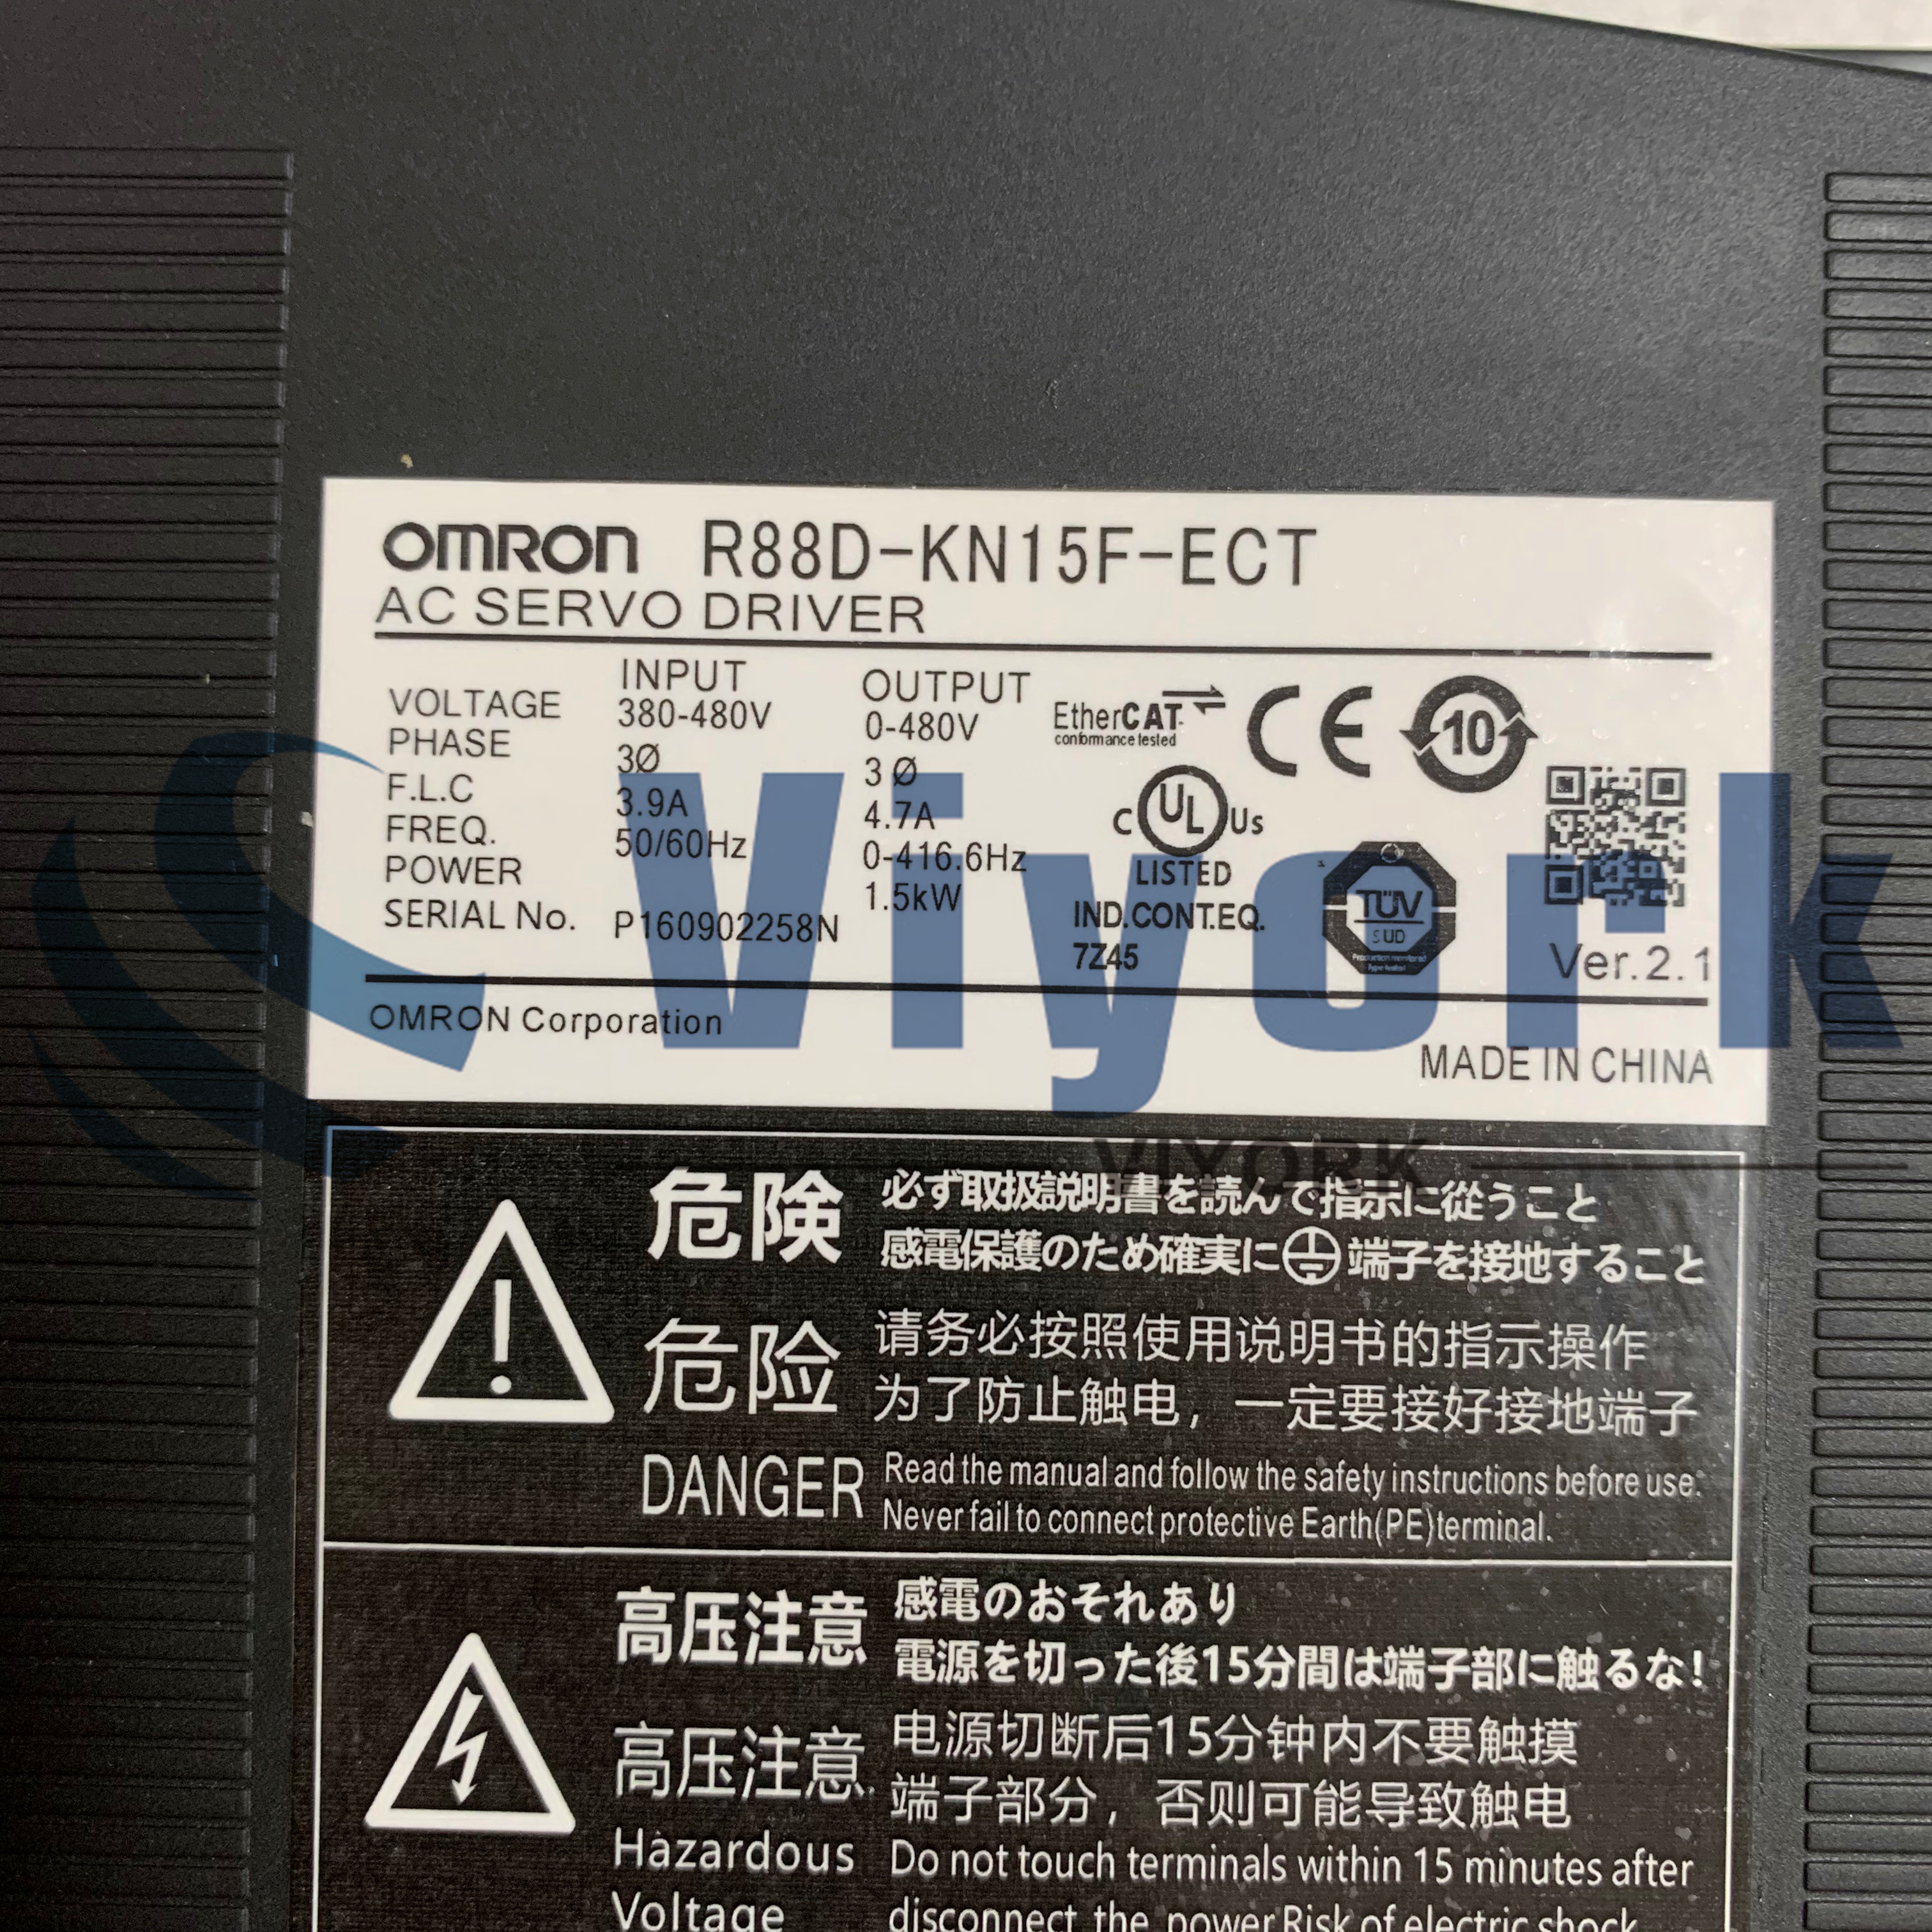 OMRON R88D-KN15F-ECT